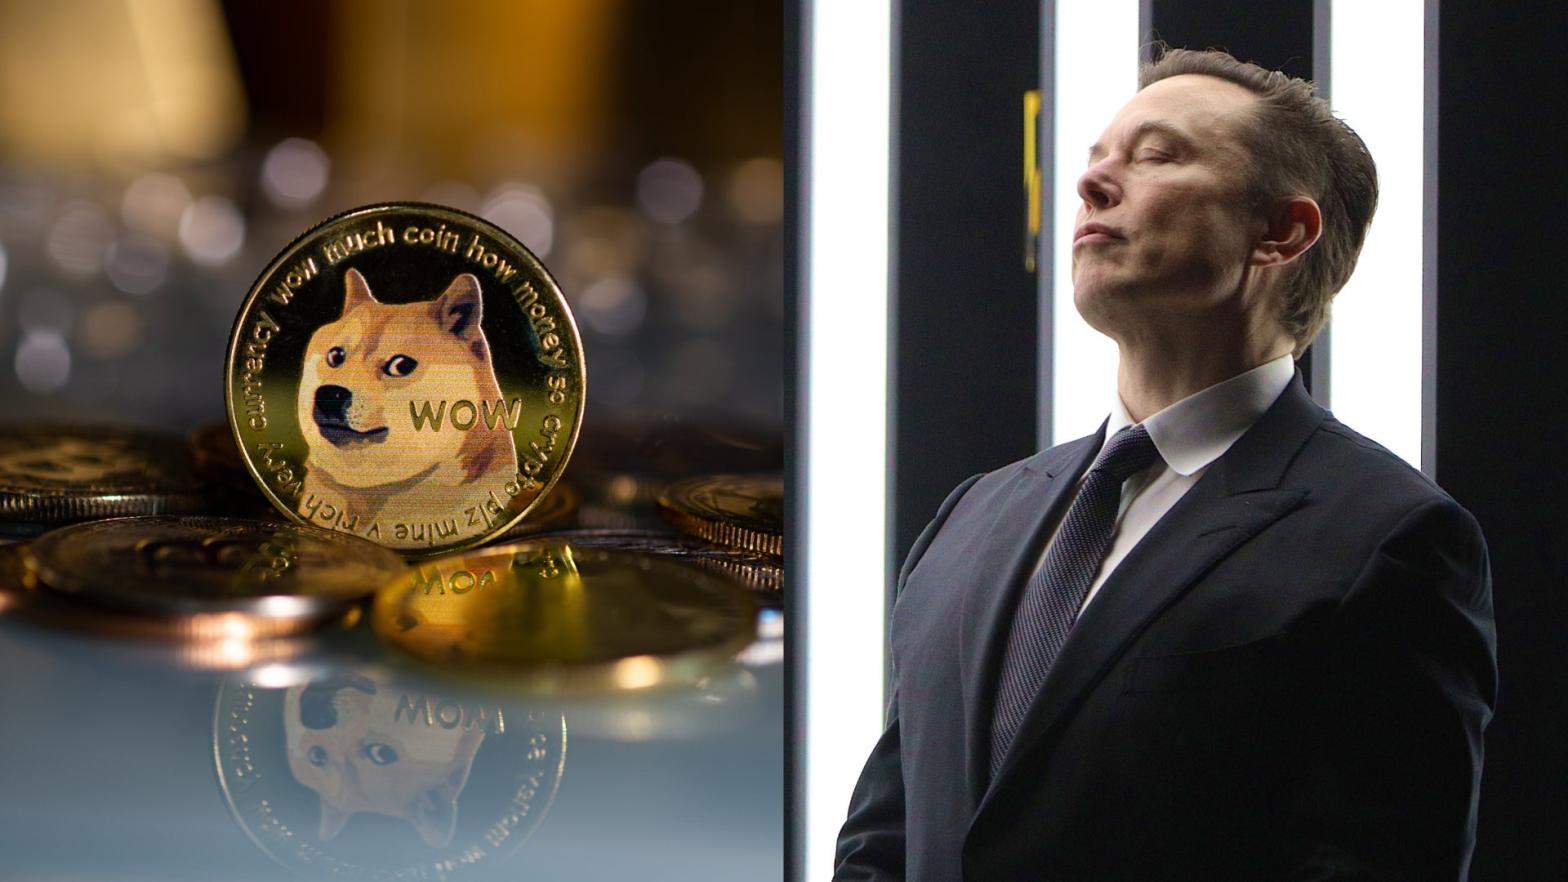 The plaintiffs argue that Musk and his companies intentionally drove up the value of Dogecoin 36,000% over two years before letting it tank. (Image: surassawadee (Shutterstock),Image: Christian Marquardt - Pool (Getty Images))